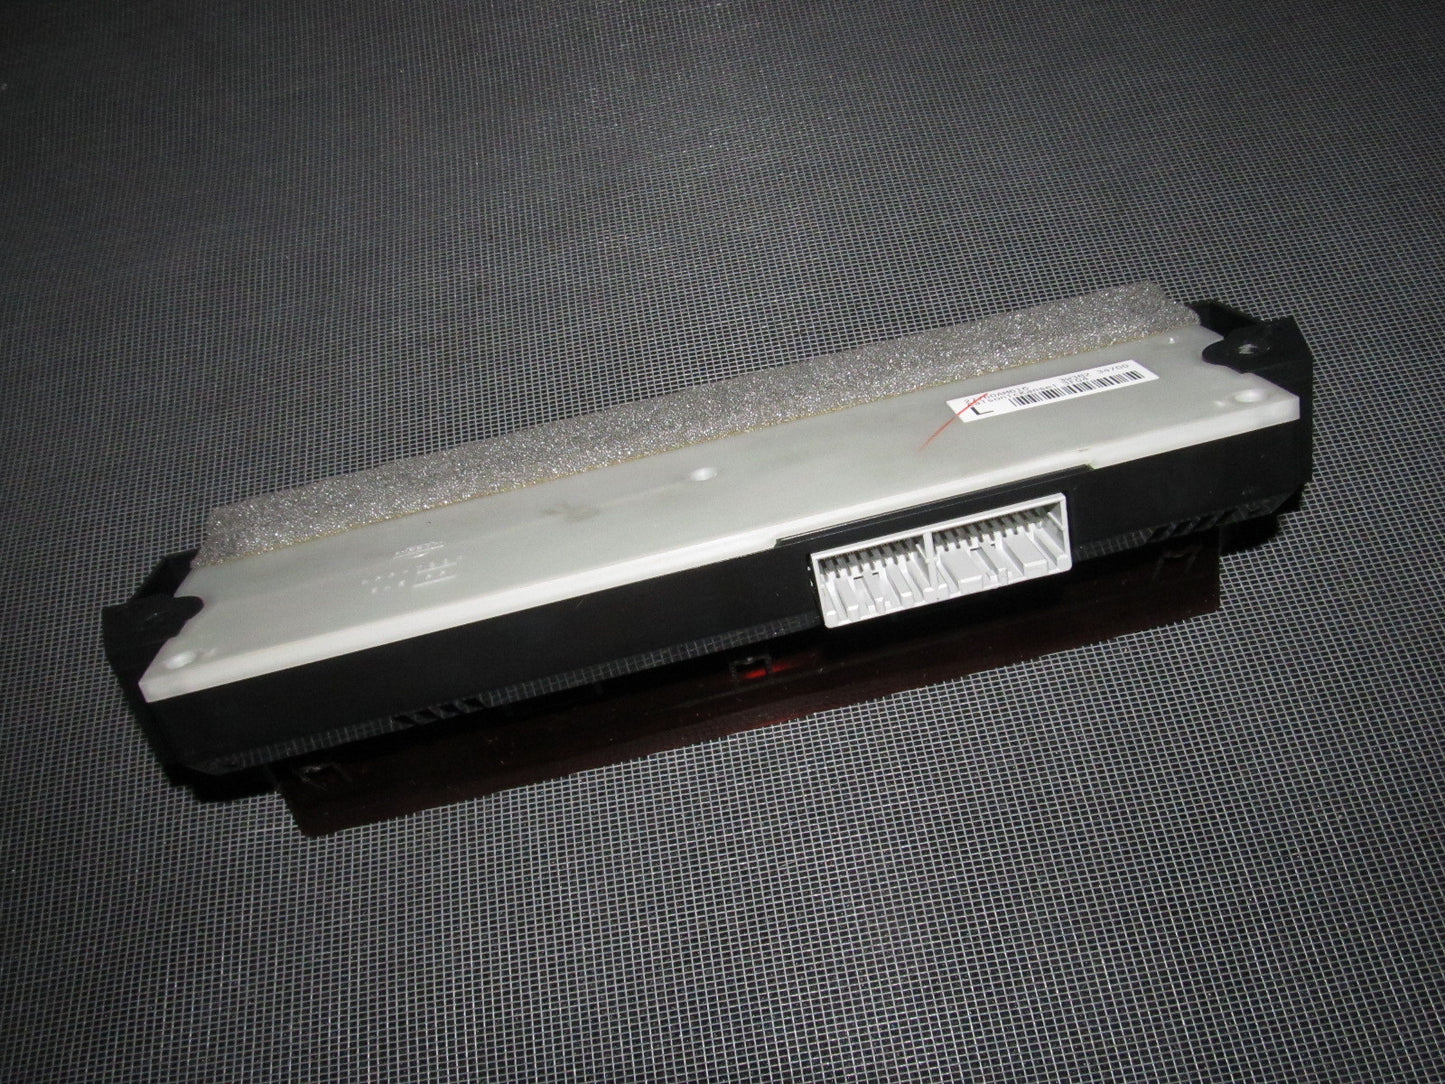 03 04 Infiniti G35 OEM Climate Control Cluster Panel Information Display Center